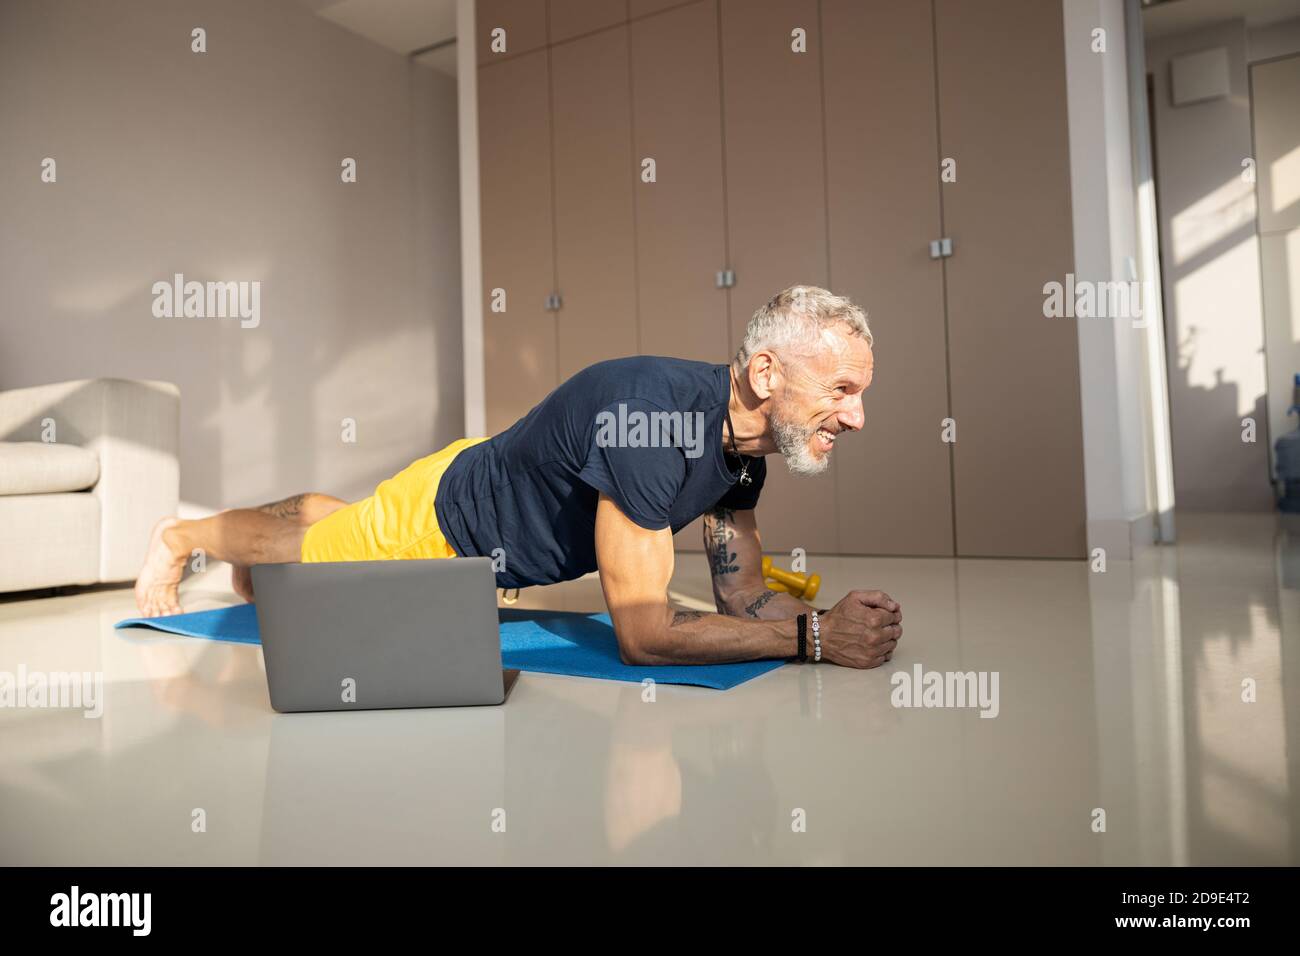 Excited male doing a front hold in a sunny room Stock Photo